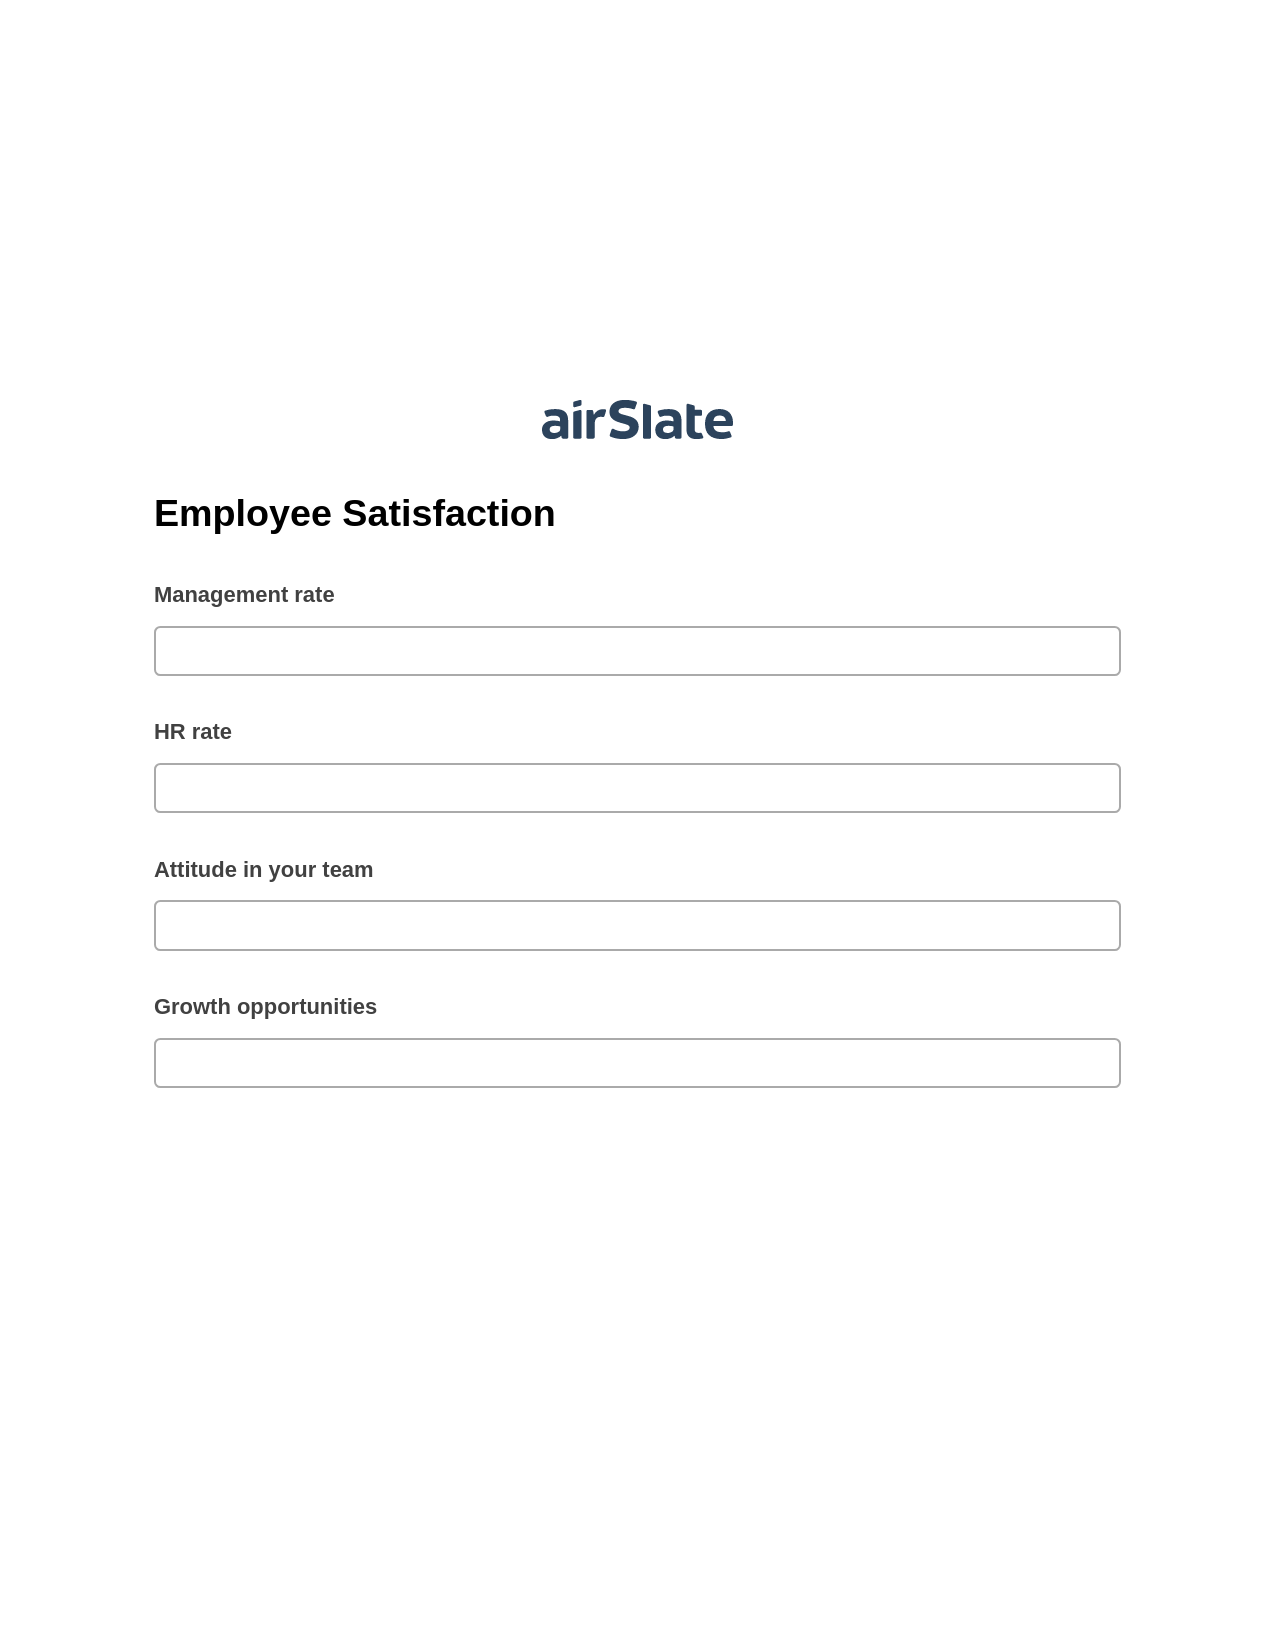 Multirole Employee Satisfaction Pre-fill from CSV File Bot, Roles Reminder Bot, Export to NetSuite Record Bot